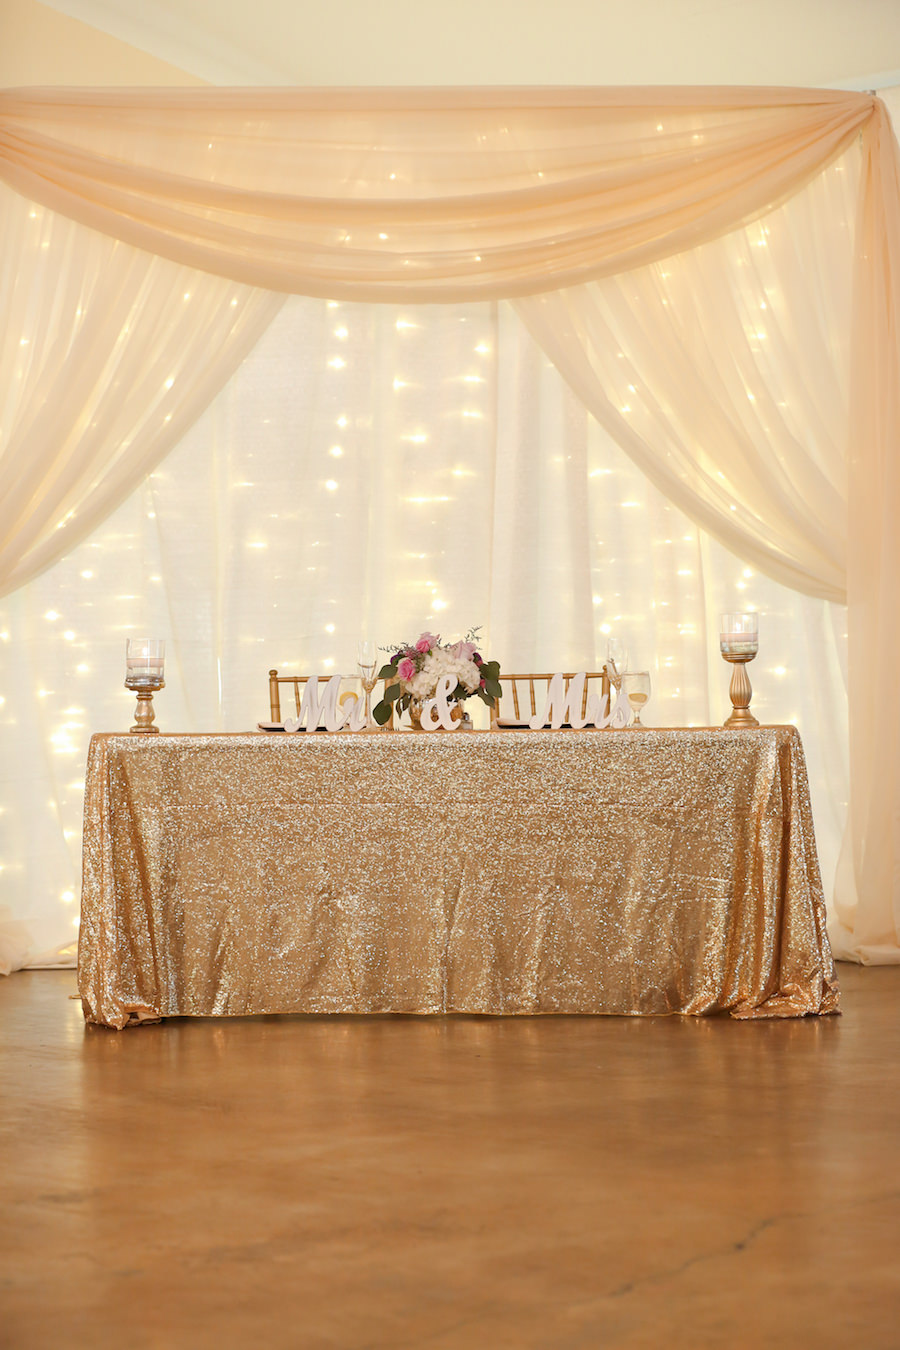 Sequin Gold Tablecloth on Wedding Sweetheart Table with Fabric Draping in Reception Room at Tampa Bay Wedding Venue The Lange Farm